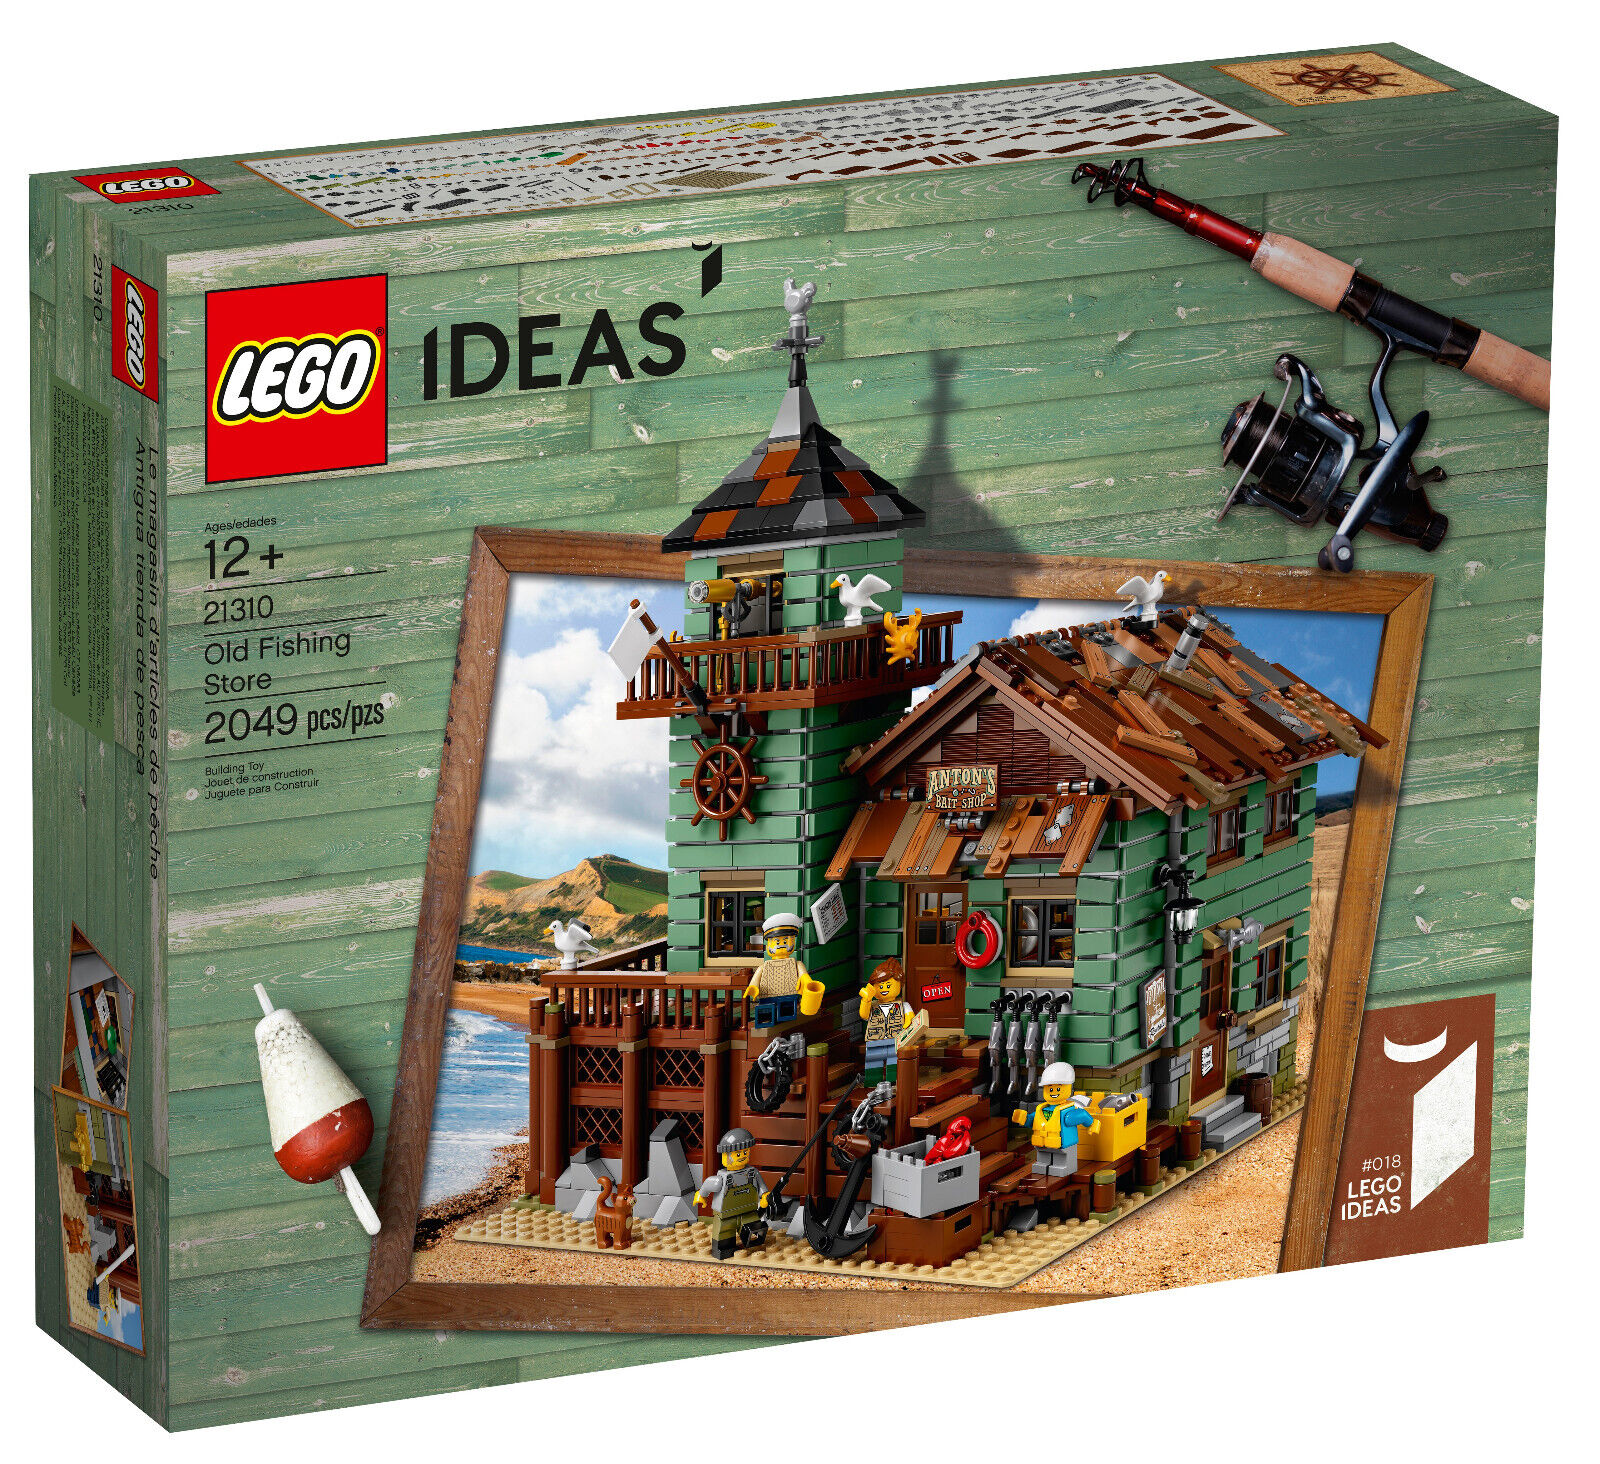 LEGO Ideas - Old Fishing Store 21310 -NEW - See Description